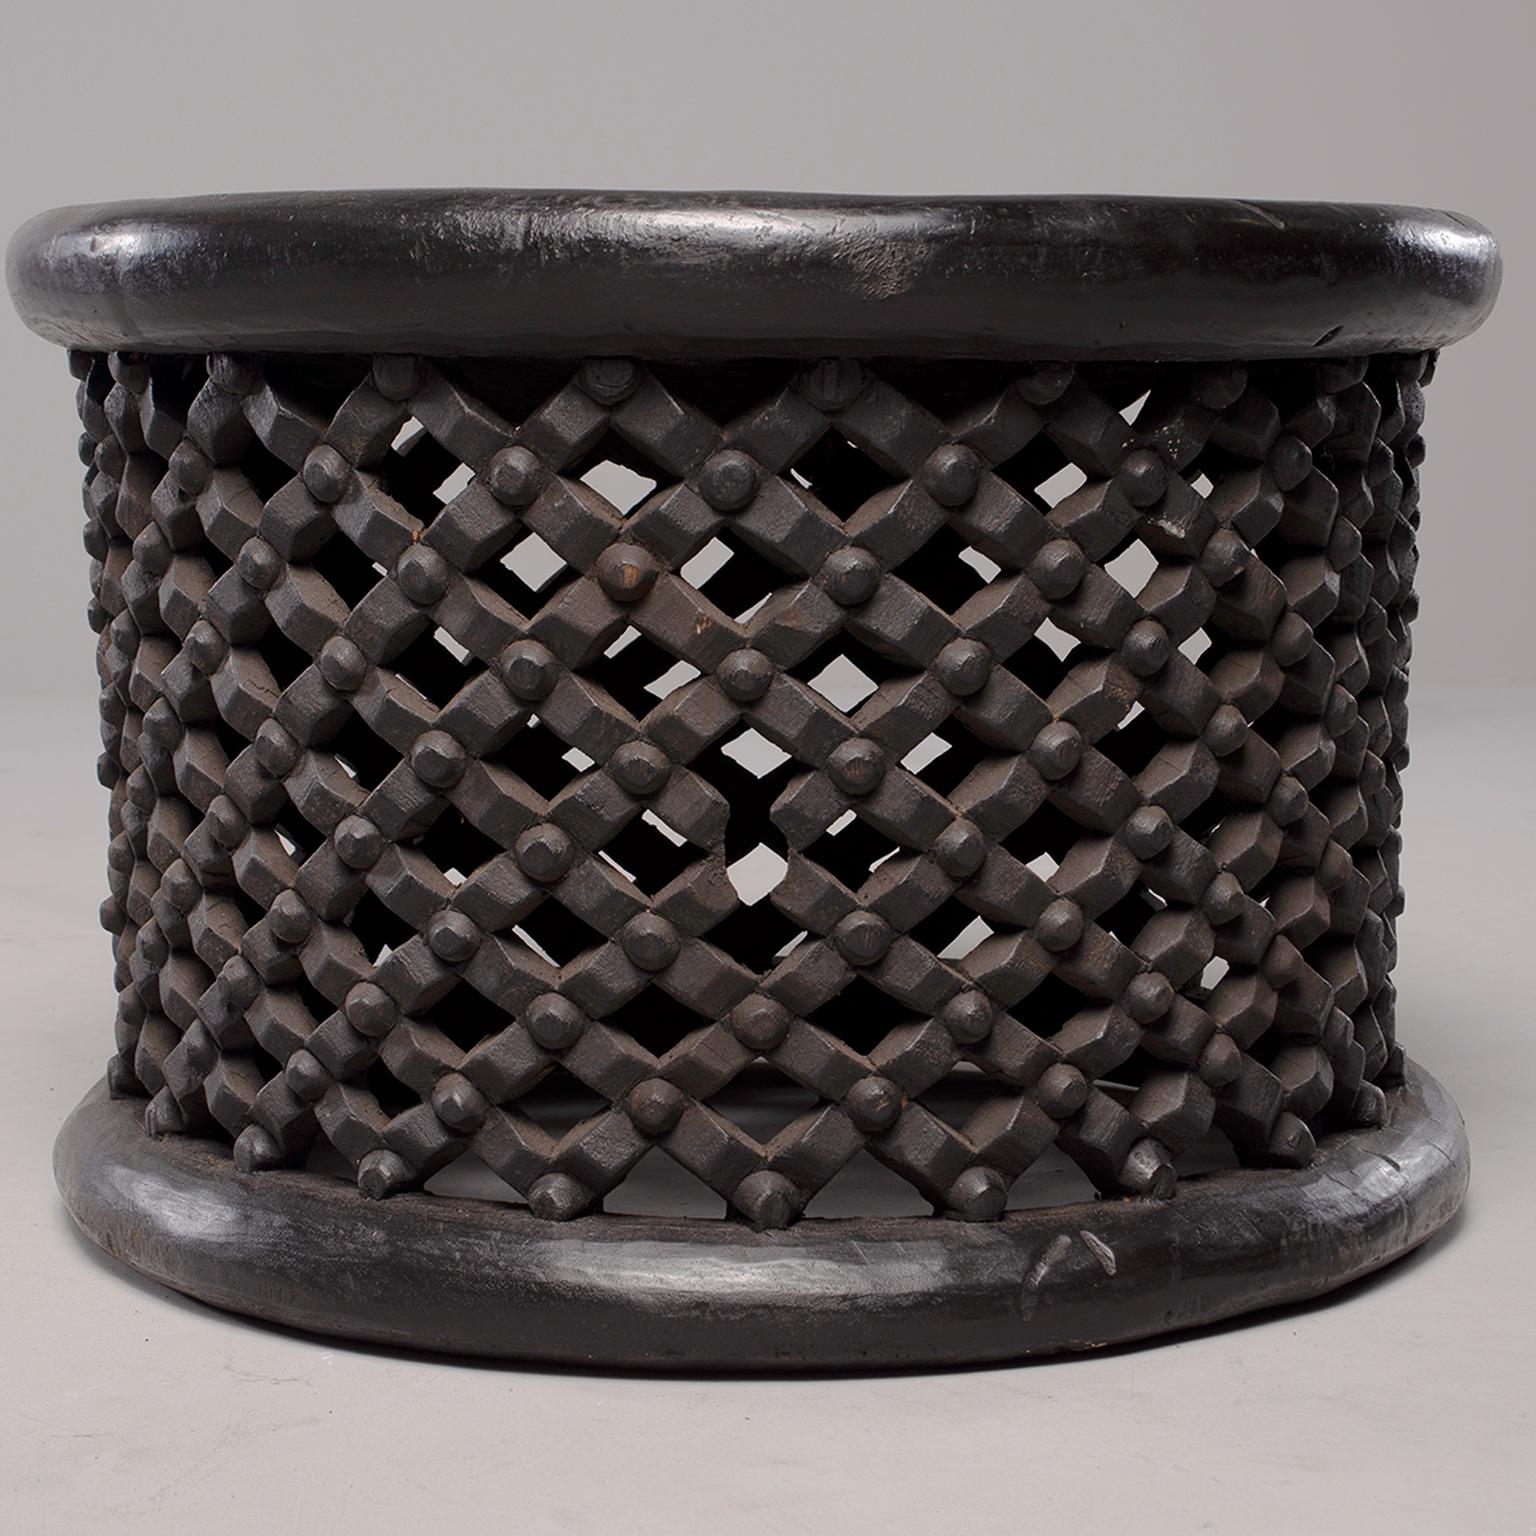 Round table or stool from Bamileke people in Cameroon is made of dark stained carved wood with an open work grid and knobs pattern, circa 1980s. The size and height is suitable to use for a stool or side / occasional table.
       